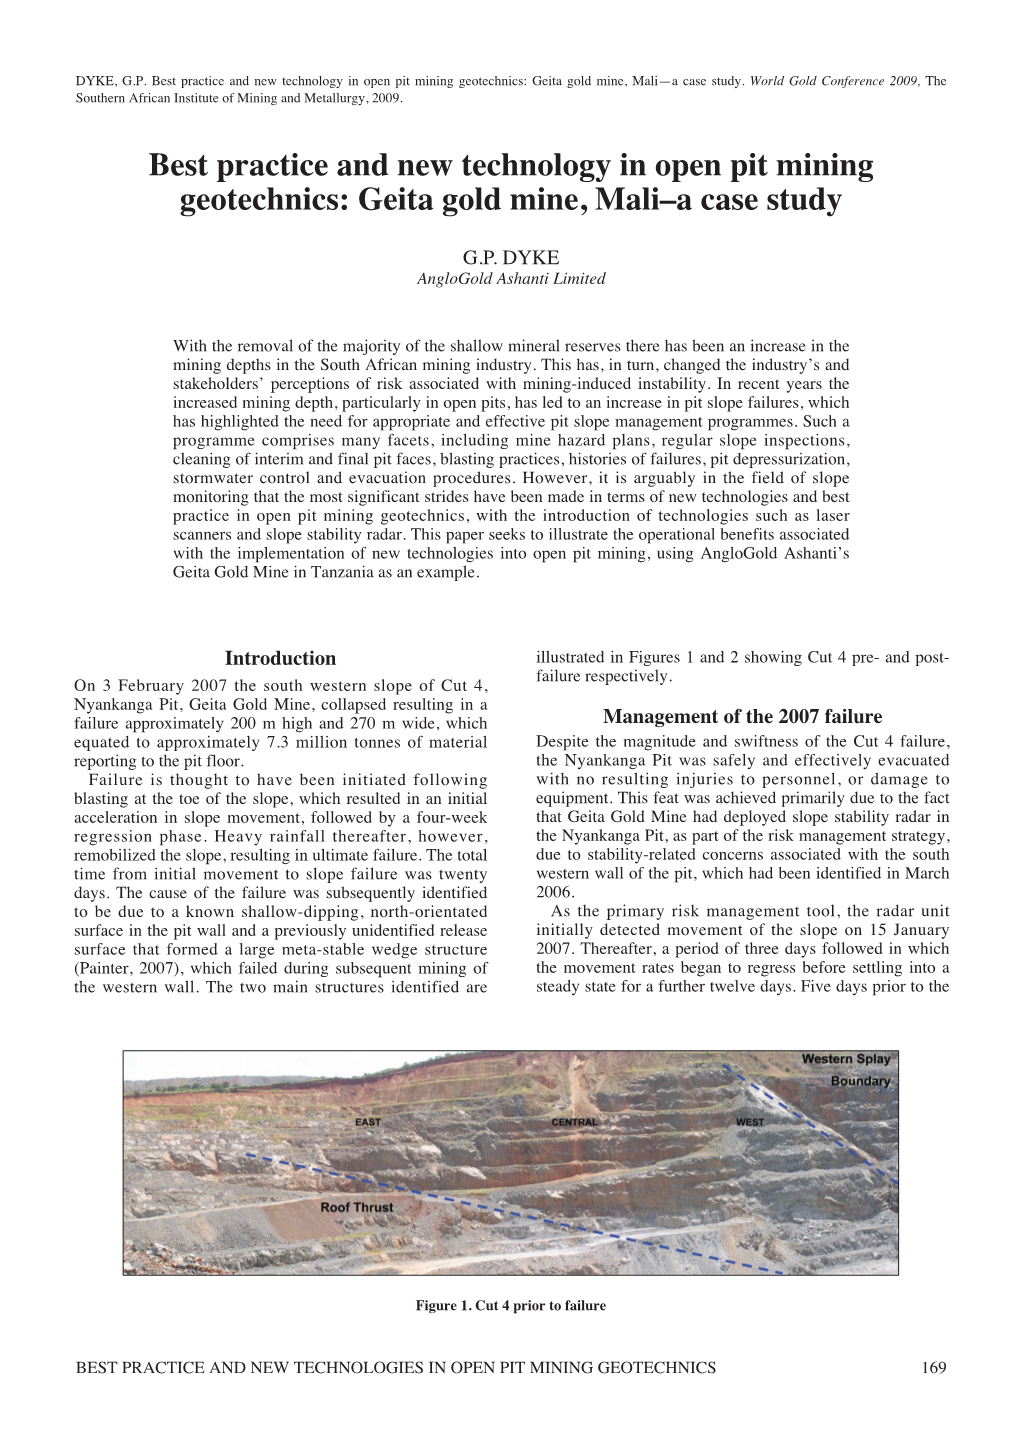 Best Practice and New Technology in Open Pit Mining Geotechnics: Geita Gold Mine, Mali—A Case Study